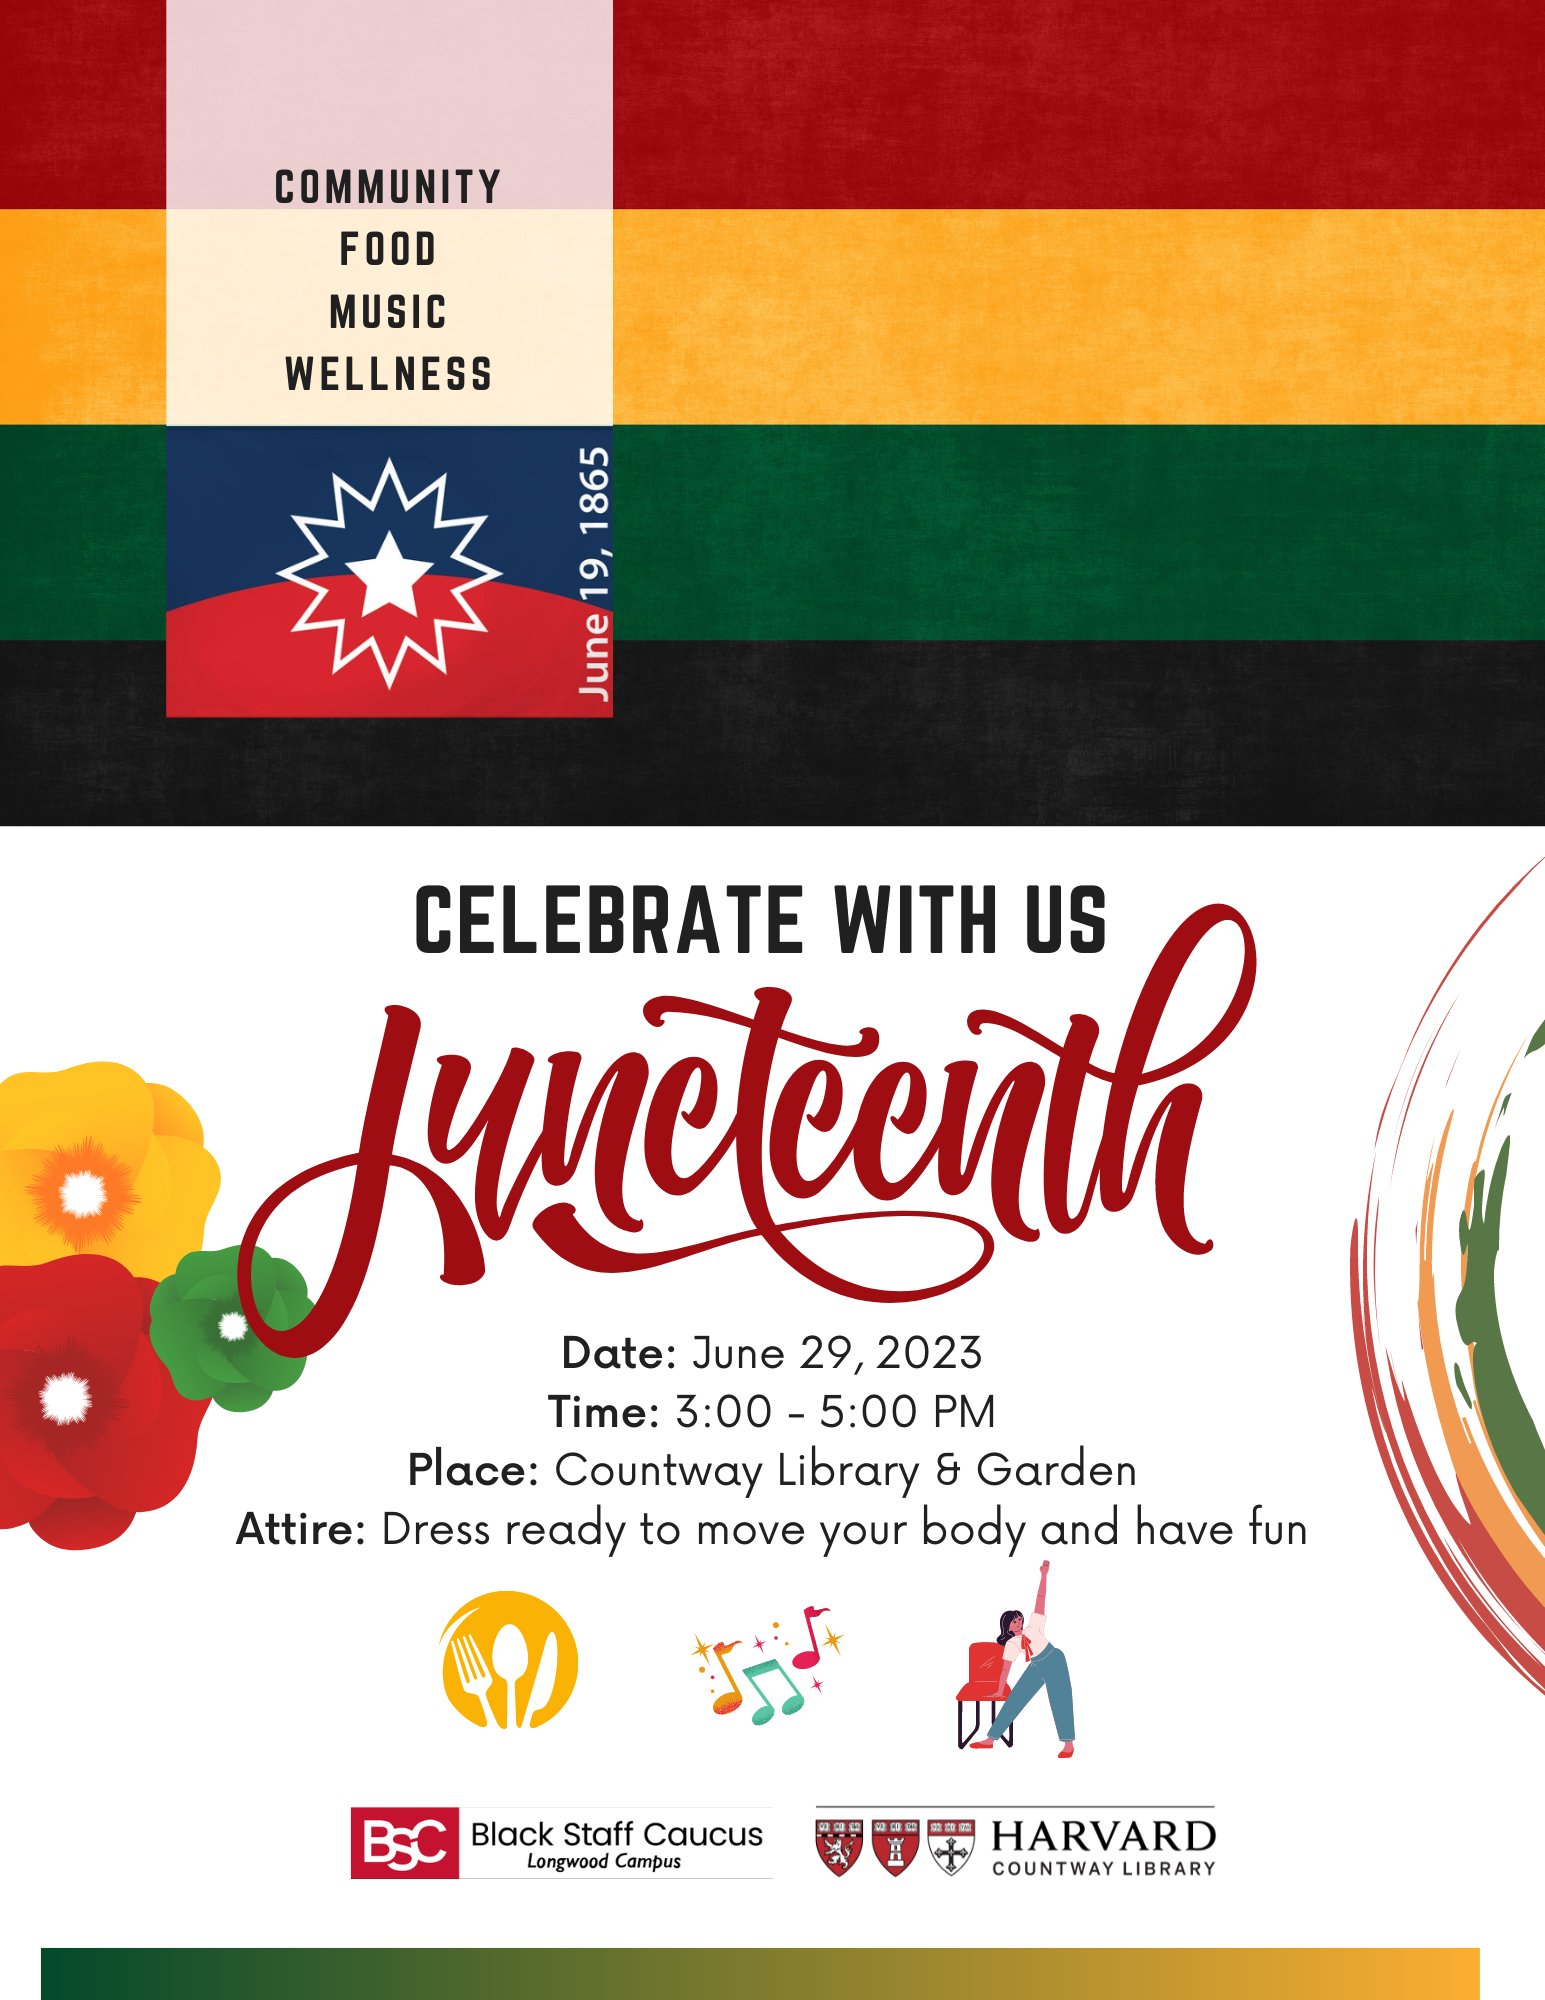 A flyer with the event info depicting song, dance, and celebration corresponding with Juneteenth.